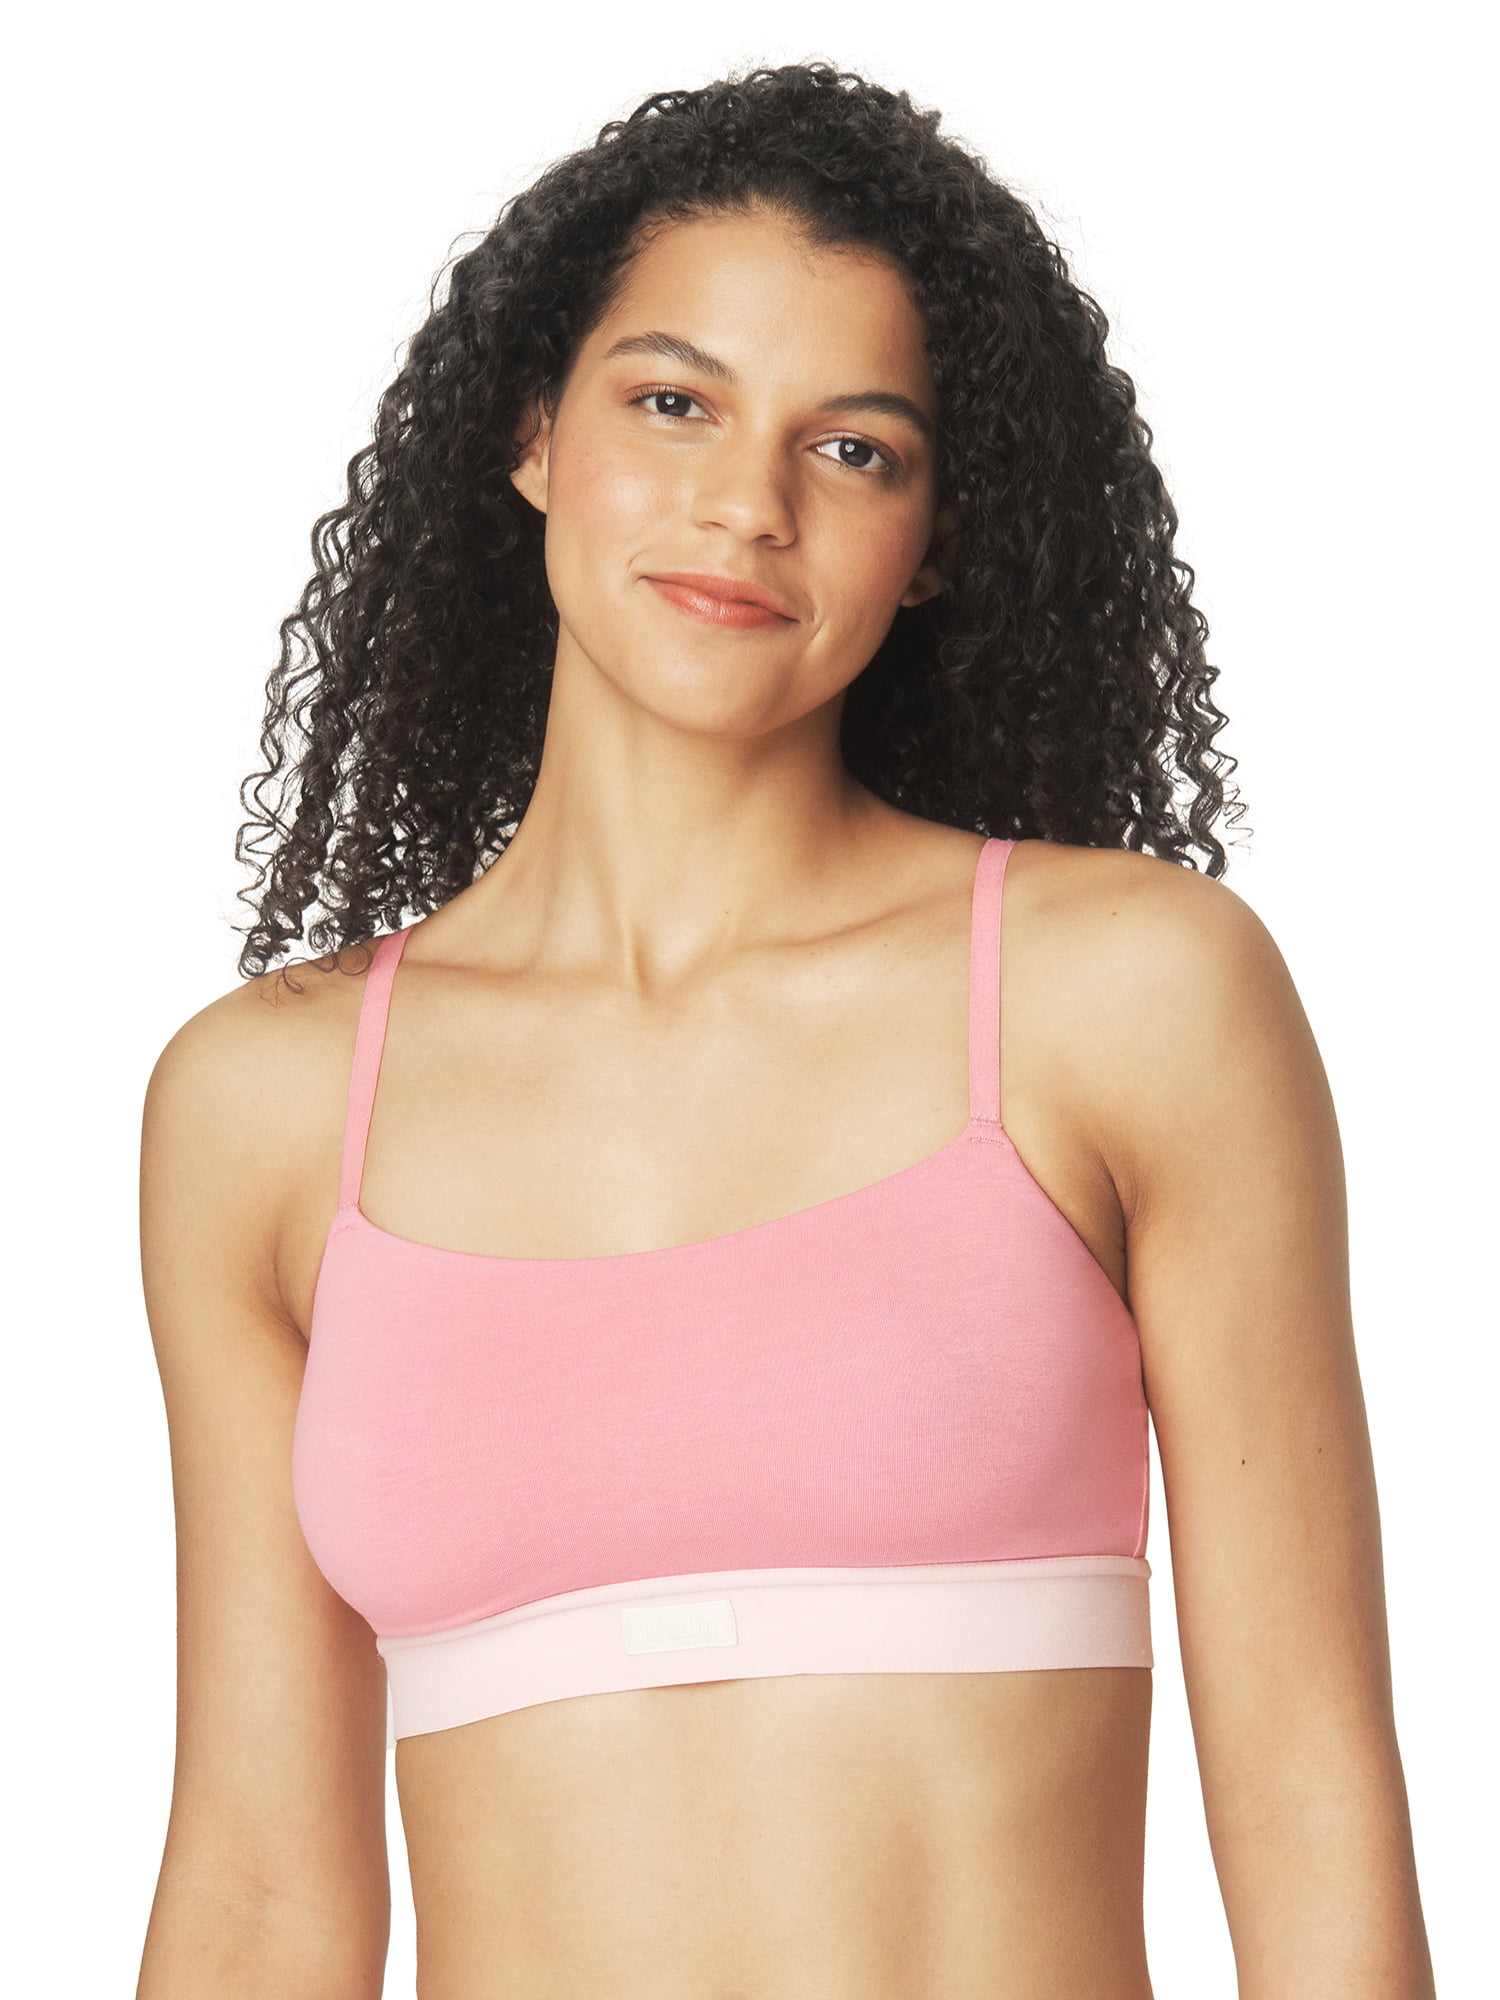 Woman Wearing Wrong Size Bra Stock Photo - Image of scoop, size: 289497774